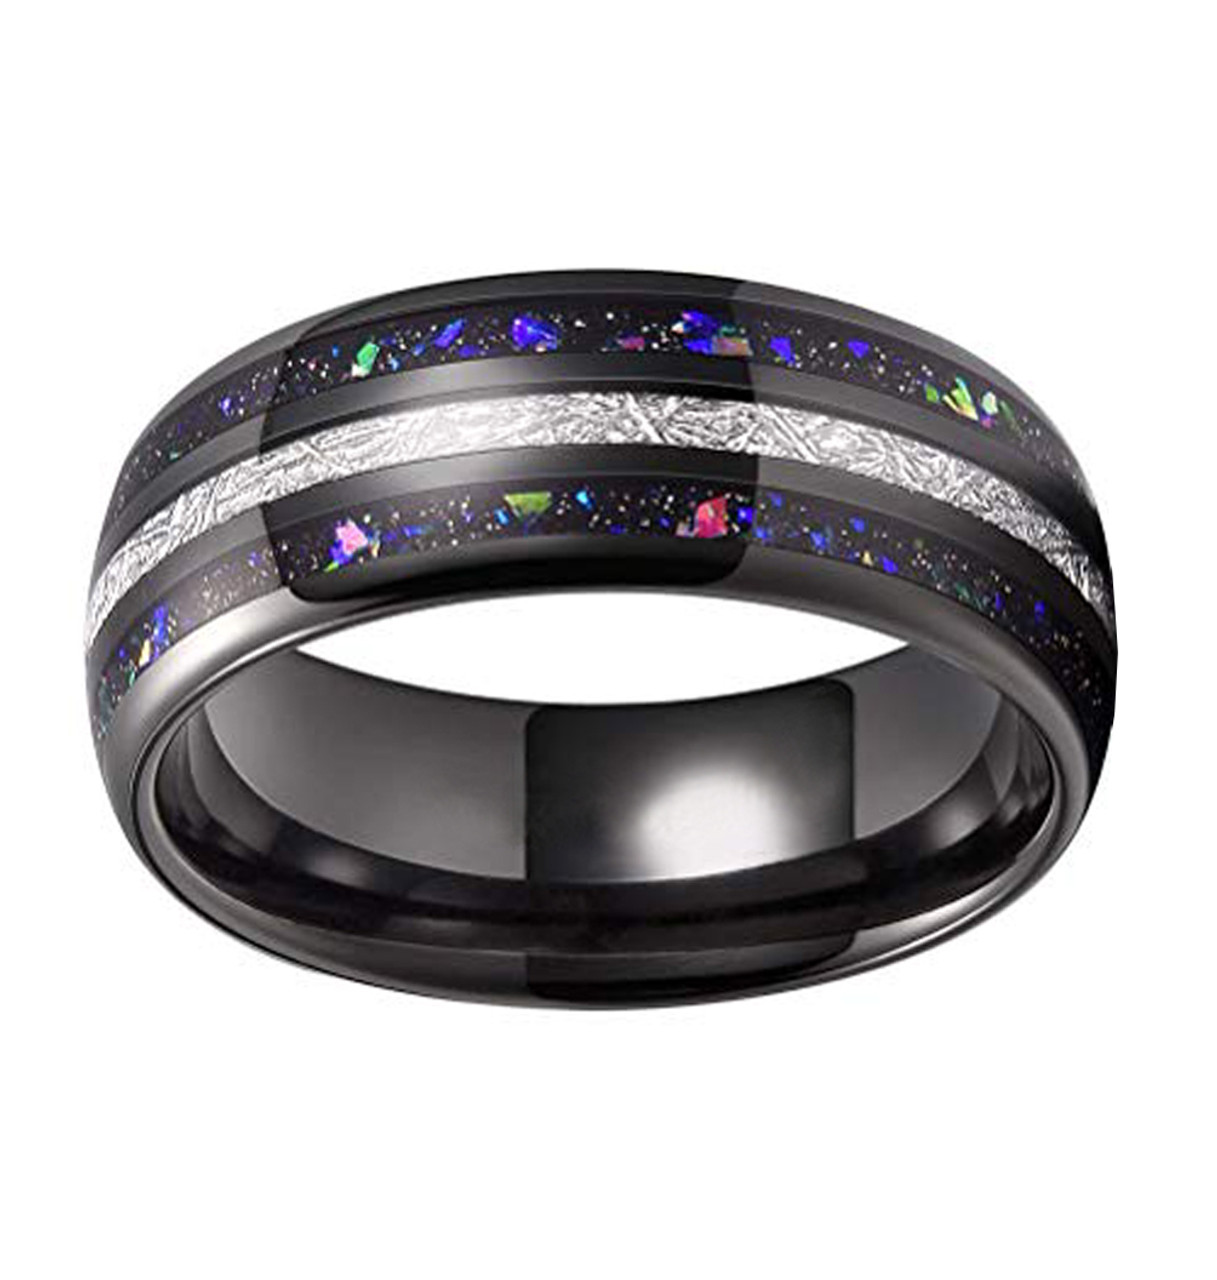 (8mm)  Unisex or Men's Tungsten Carbide Wedding ring bands. Black Tone Meteorite Ring with Multi Color Rainbow Opal Inlay Ring (Organic colors)